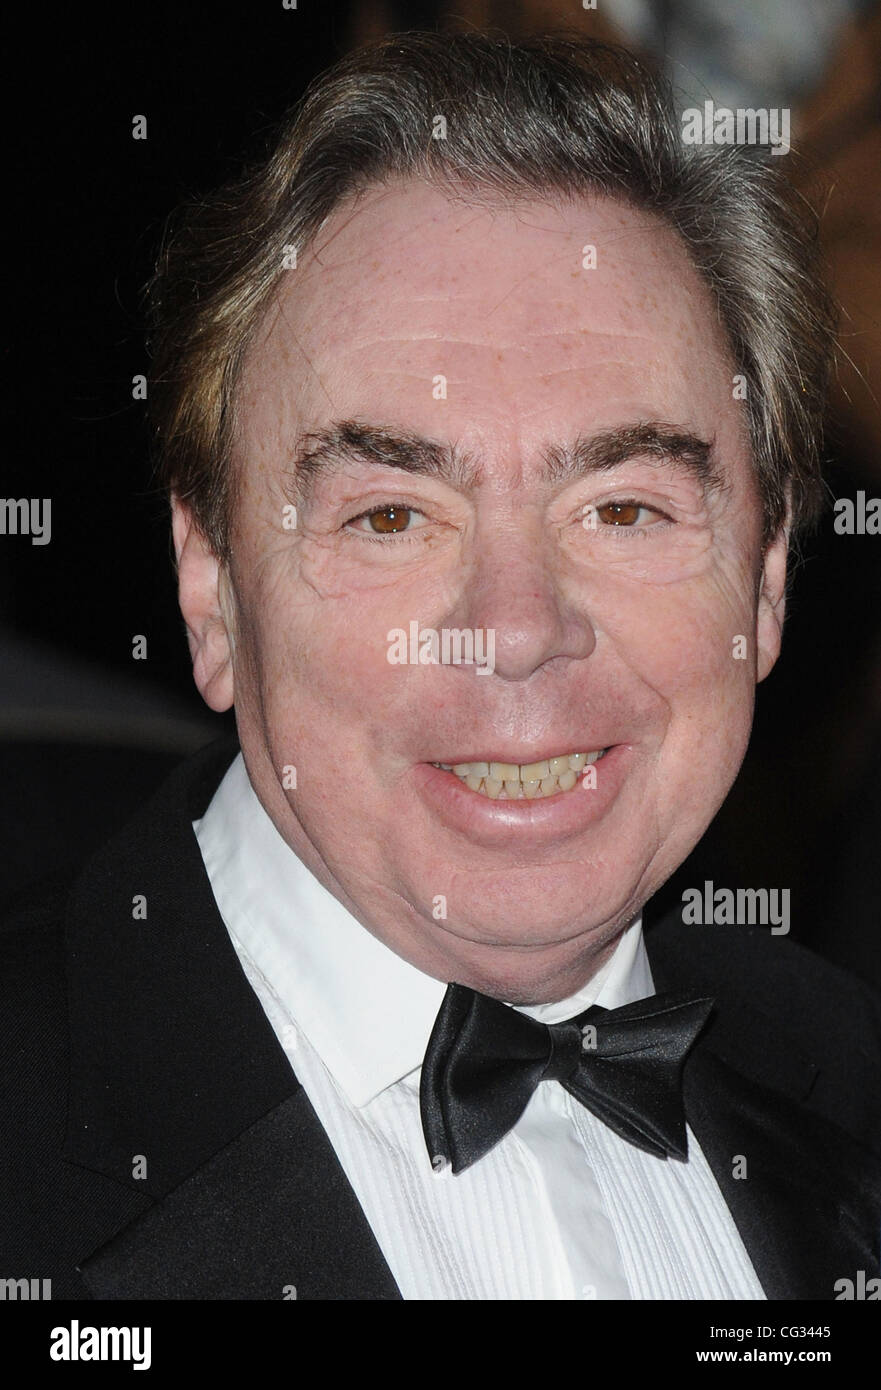 Andrew Lloyd Webber at 'A Night Of Heroes: The Sun Military Awards' at The Imperial War Museum, London, England- 15.12.10 Stock Photo